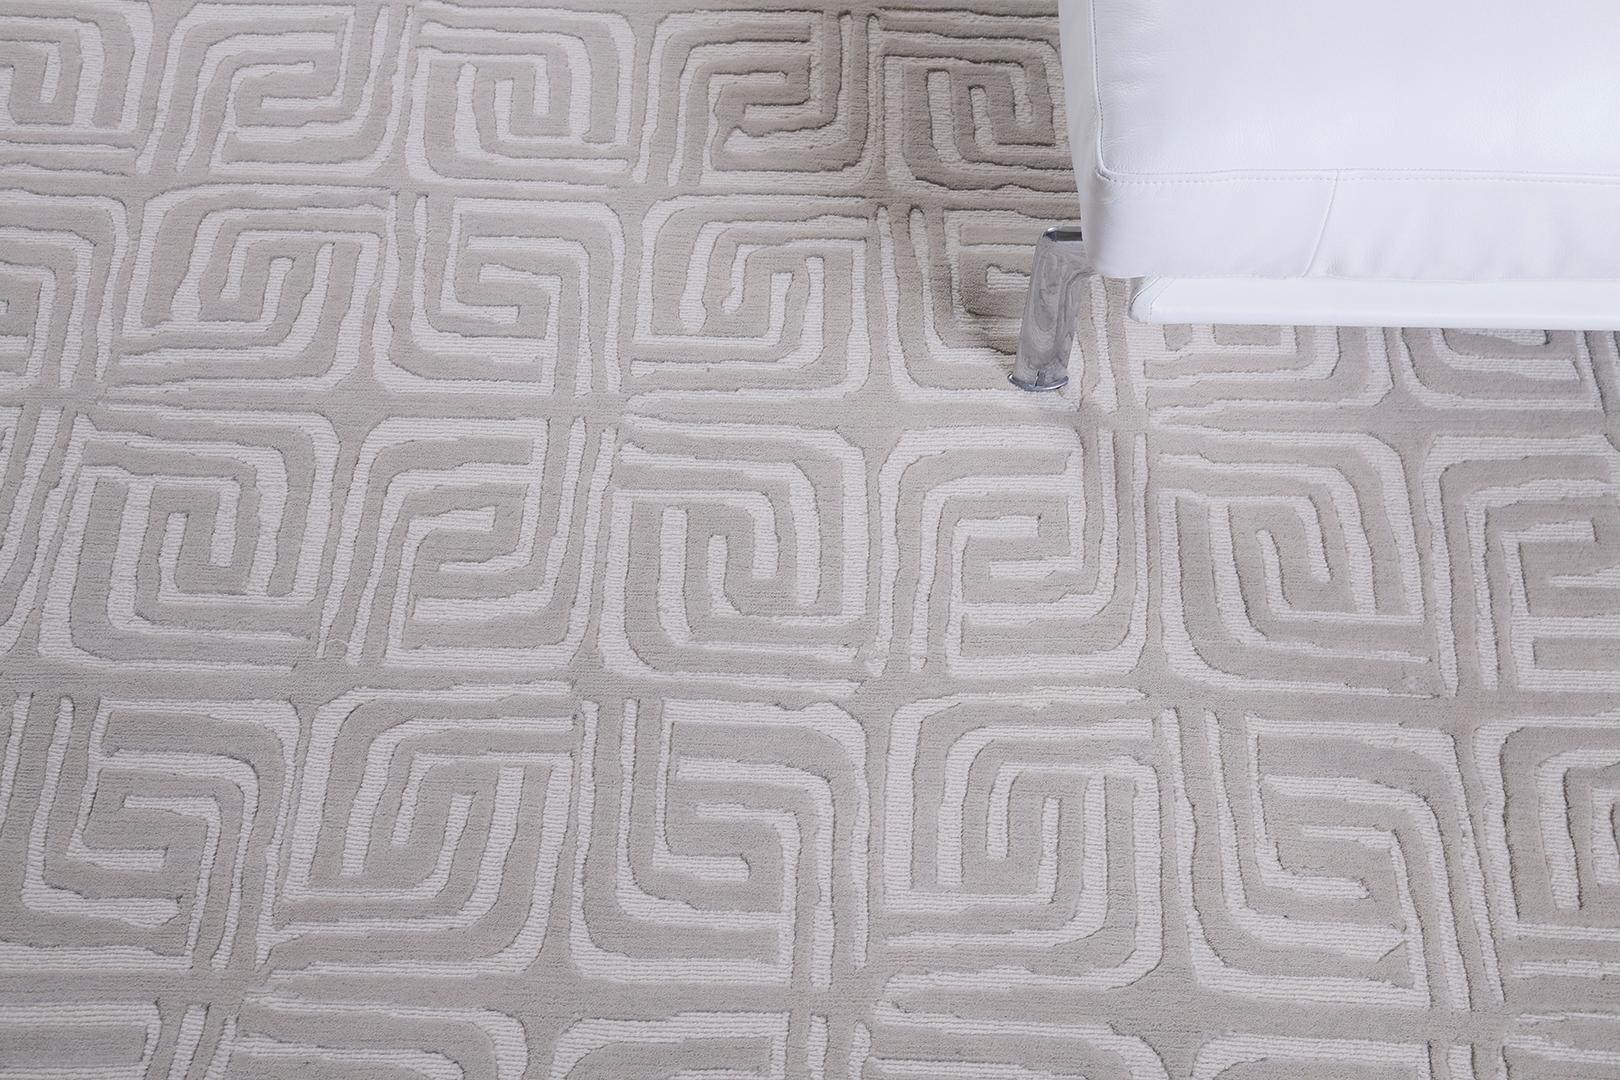 Interlaced maze repeat of tonal wool loop and pile. Aniki rug brings a fresh take on concretist bas relief in tonal ivory.

Rug Number
29754
Size
9' 2